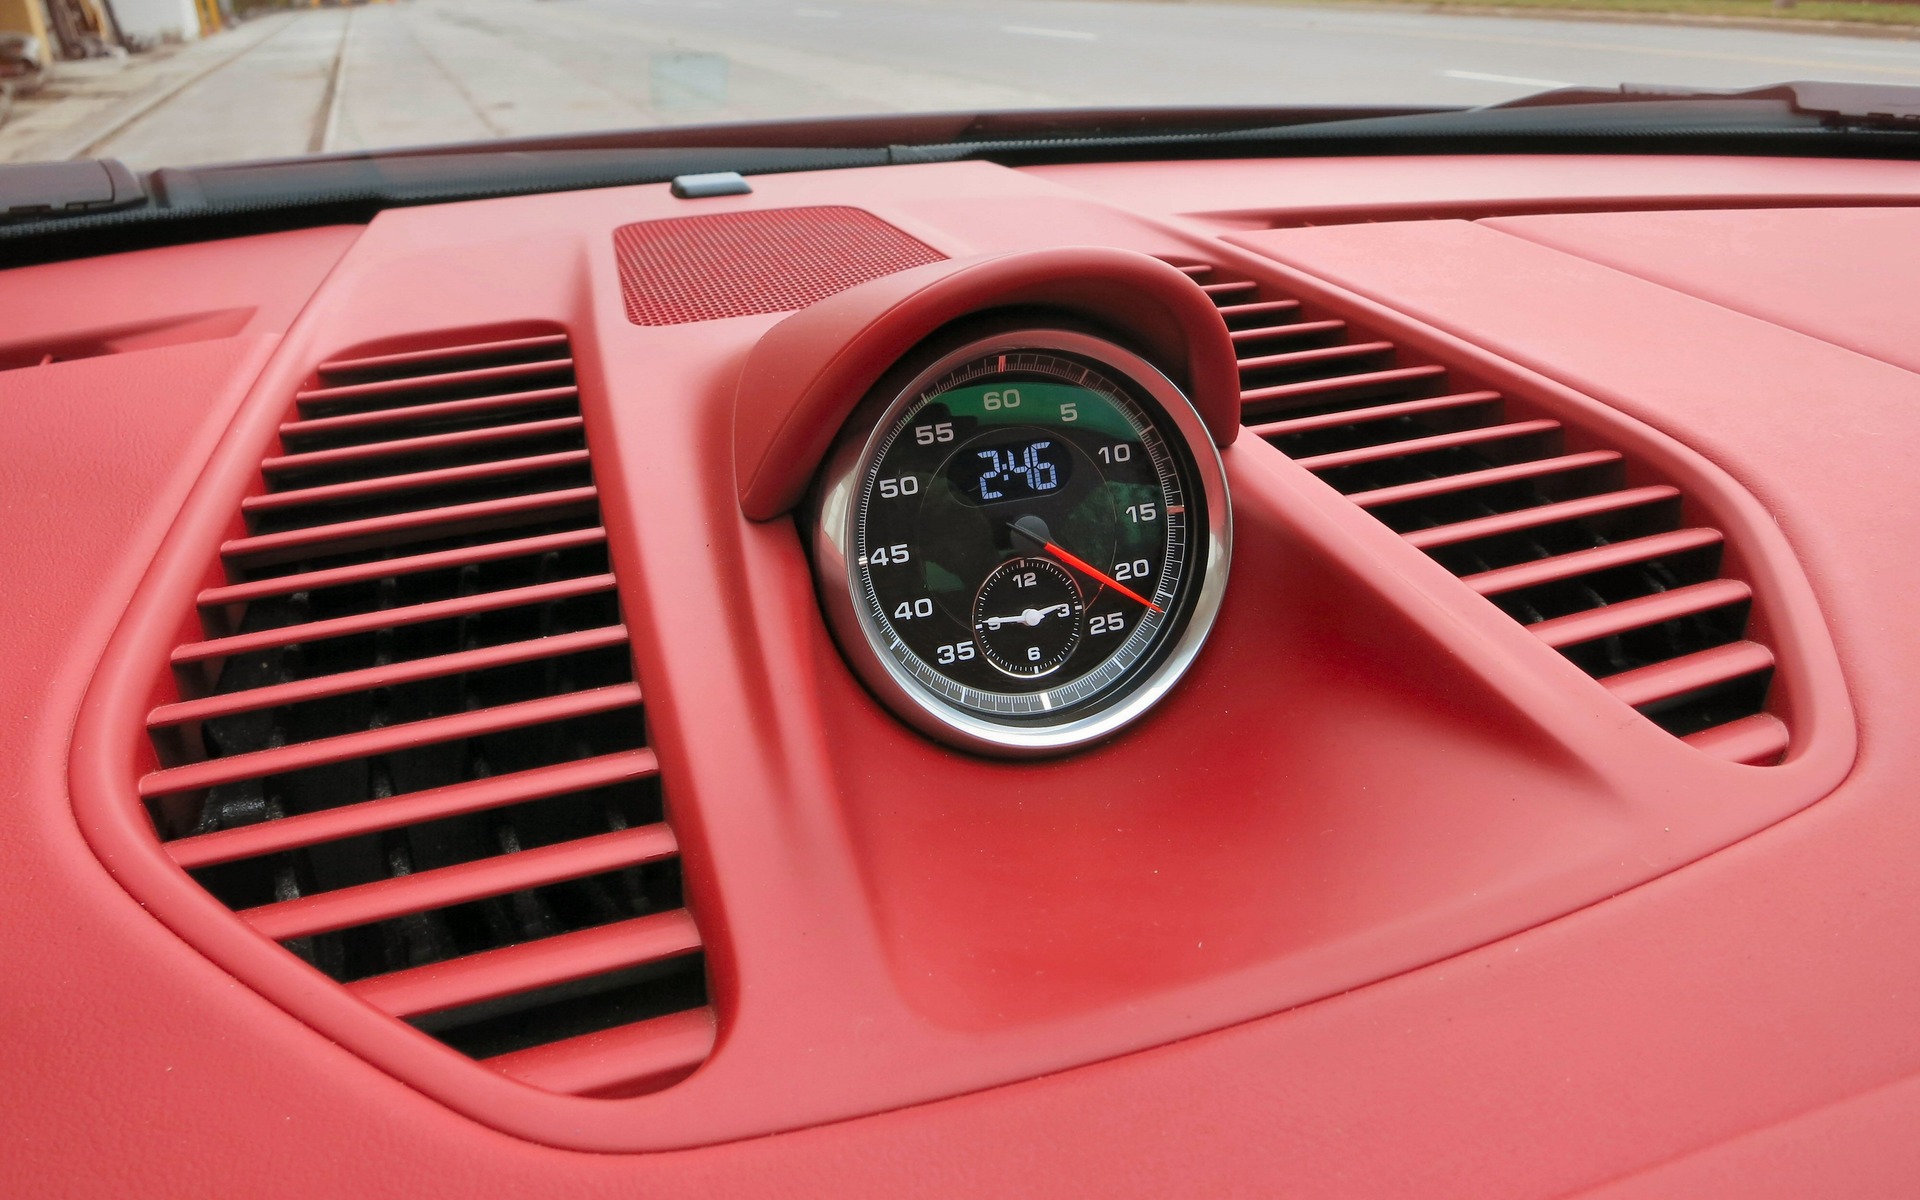 The lap-timer is a nice touch that reflects the 911's performance heritage.